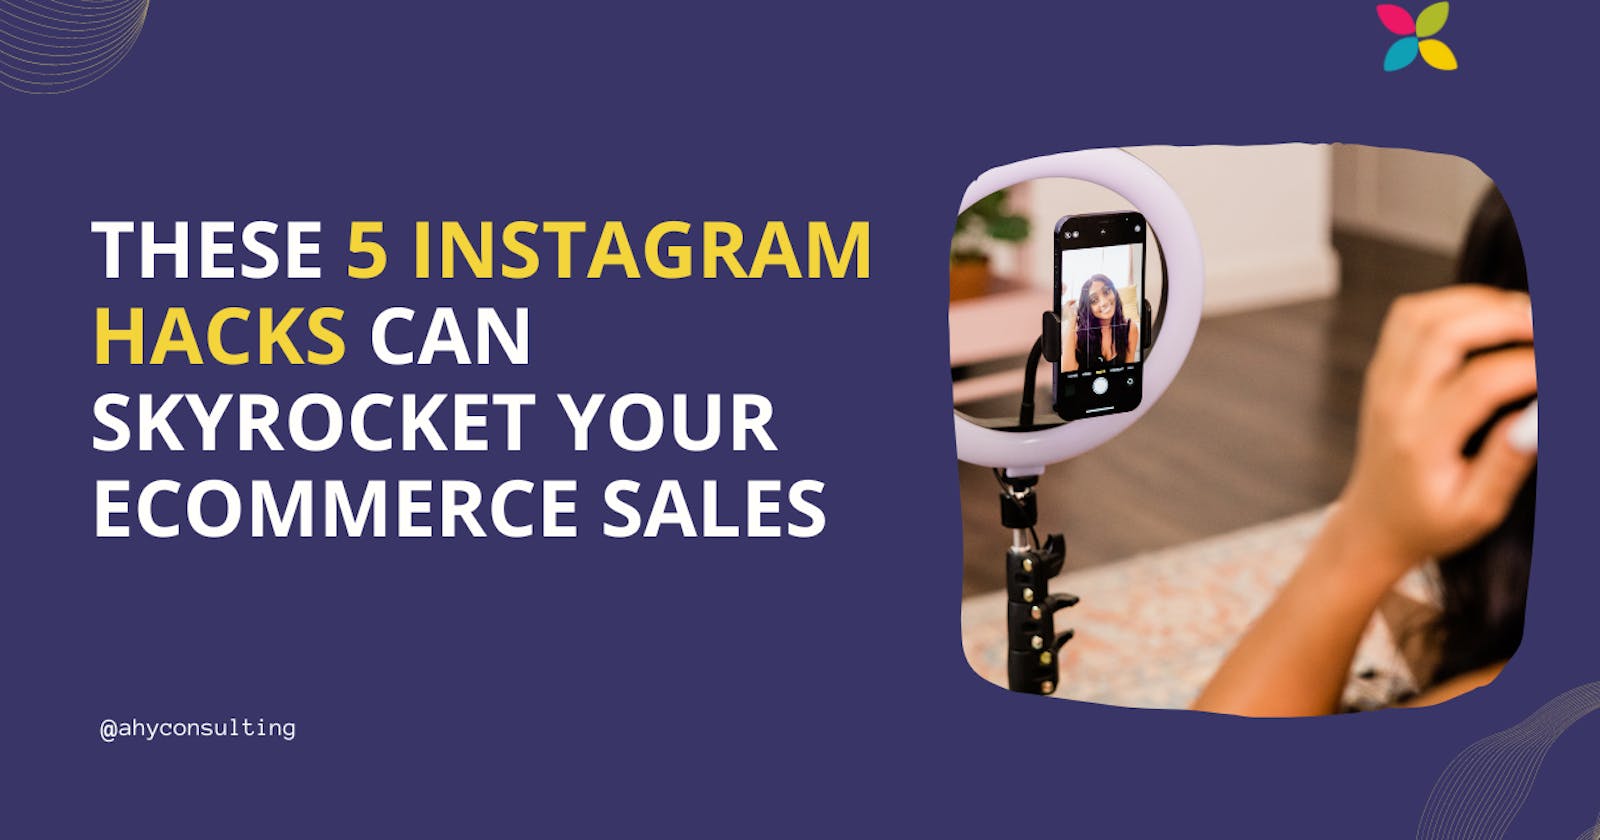 These 5 Instagram hacks can skyrocket your eCommerce sales